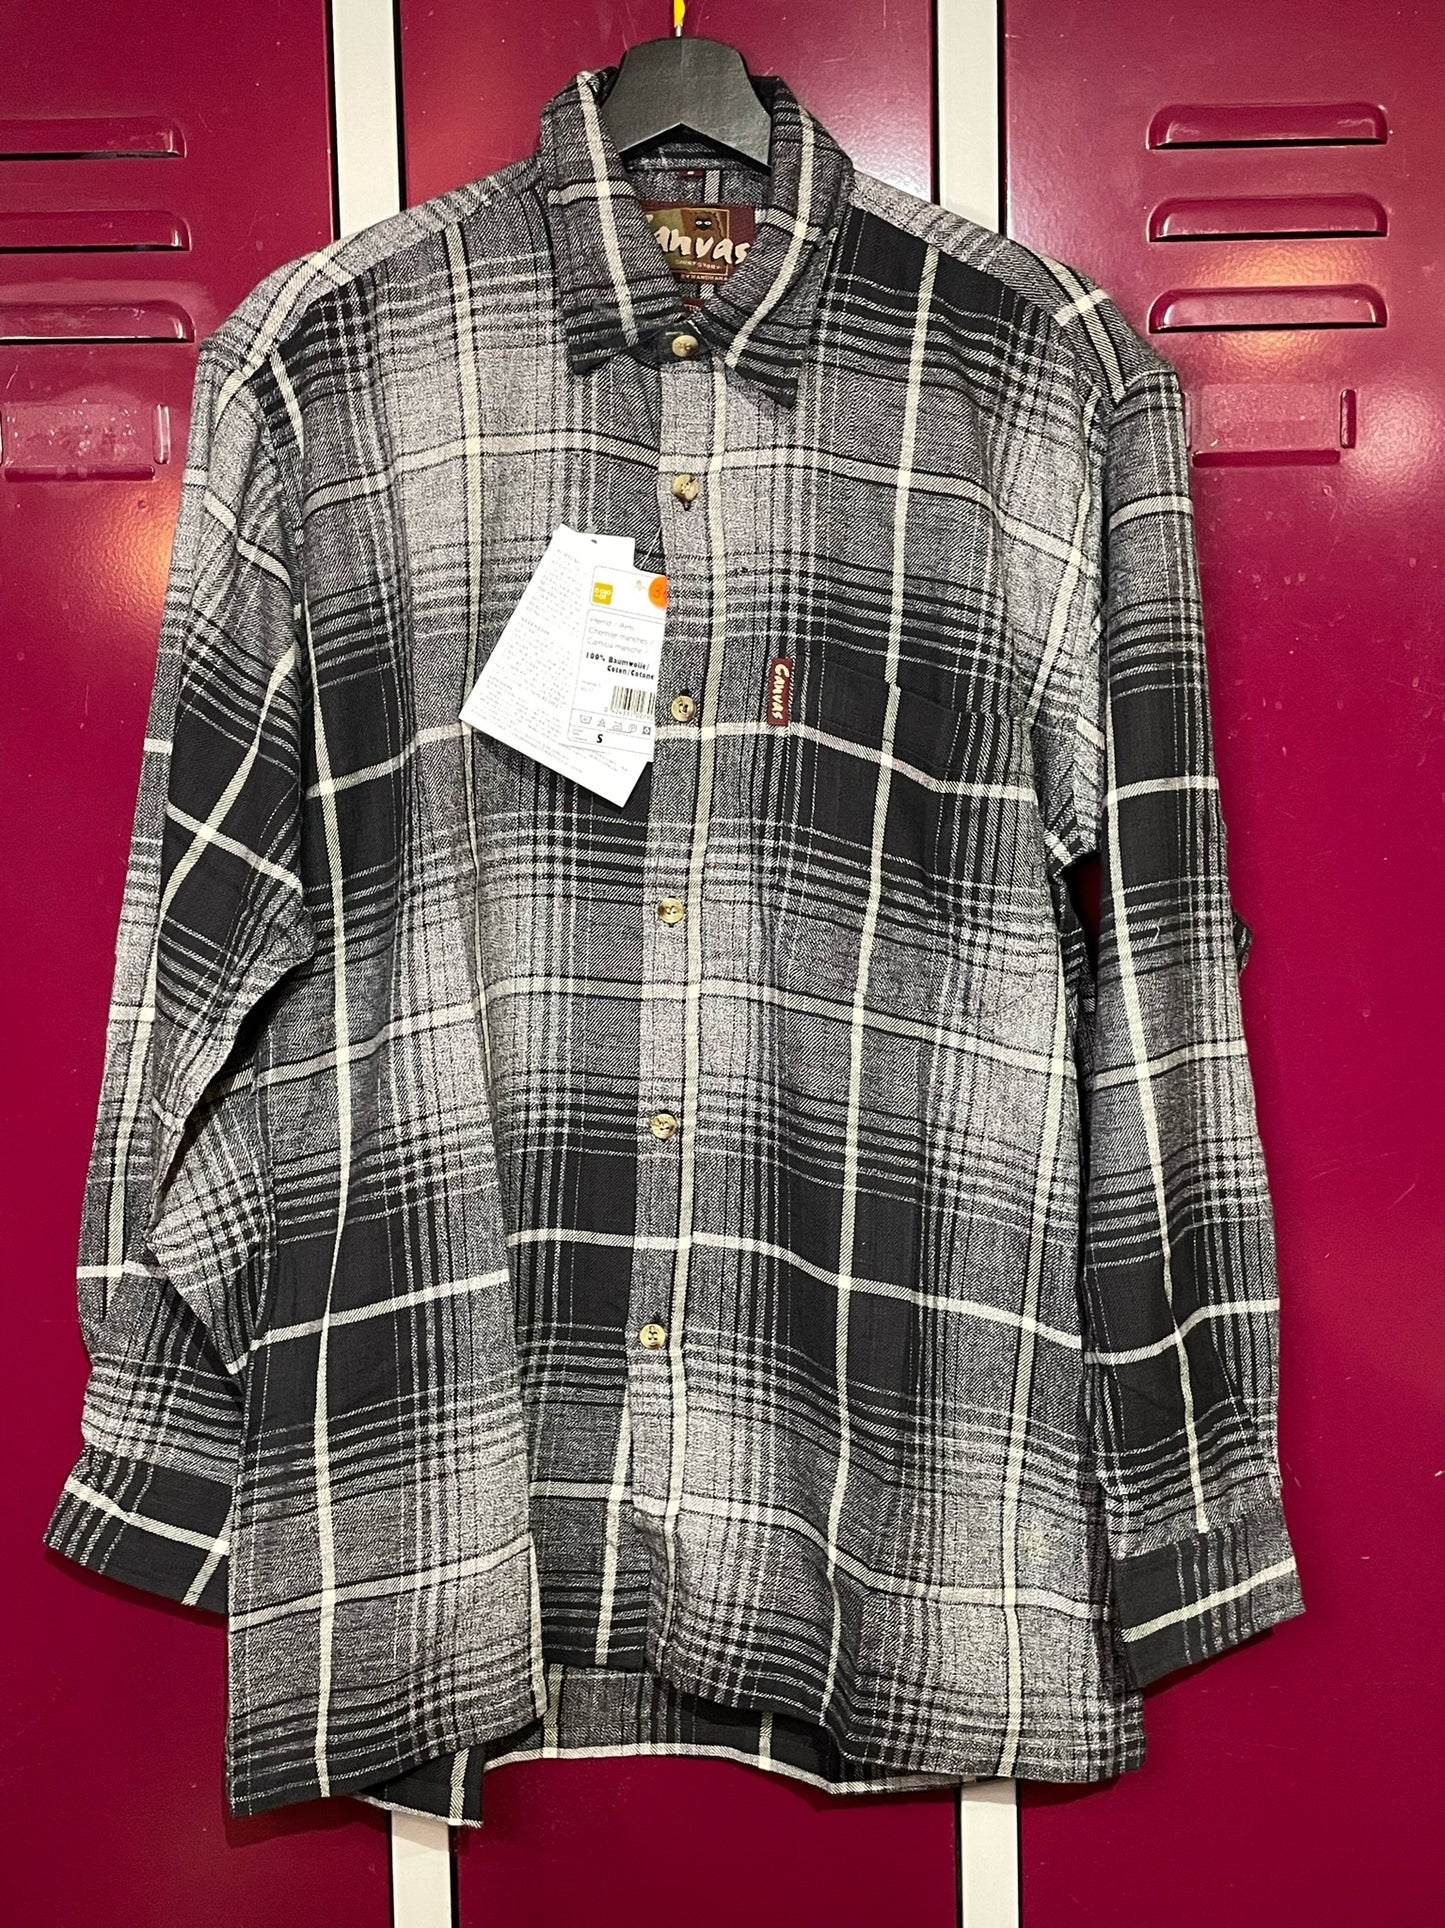 "DS" VINTAGE 90s CANVAS "COOP" CHECKED SHIRT  SZ: S (Oversized)